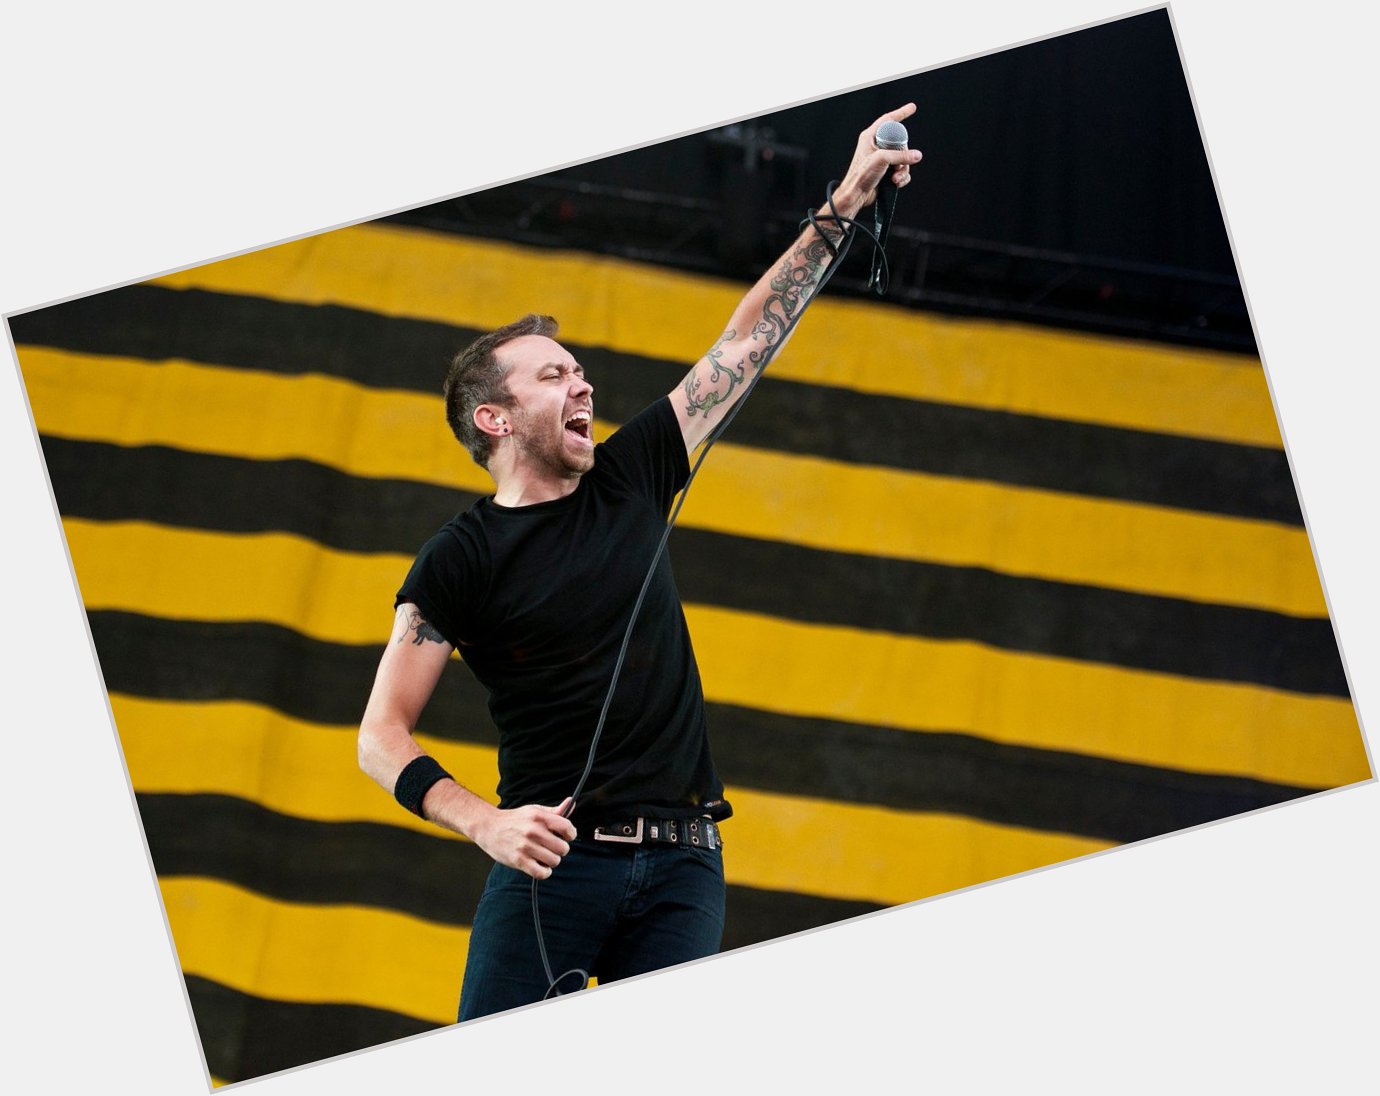 Happy belated birthday to Tim McIlrath, frontman of the greatest band of all time 